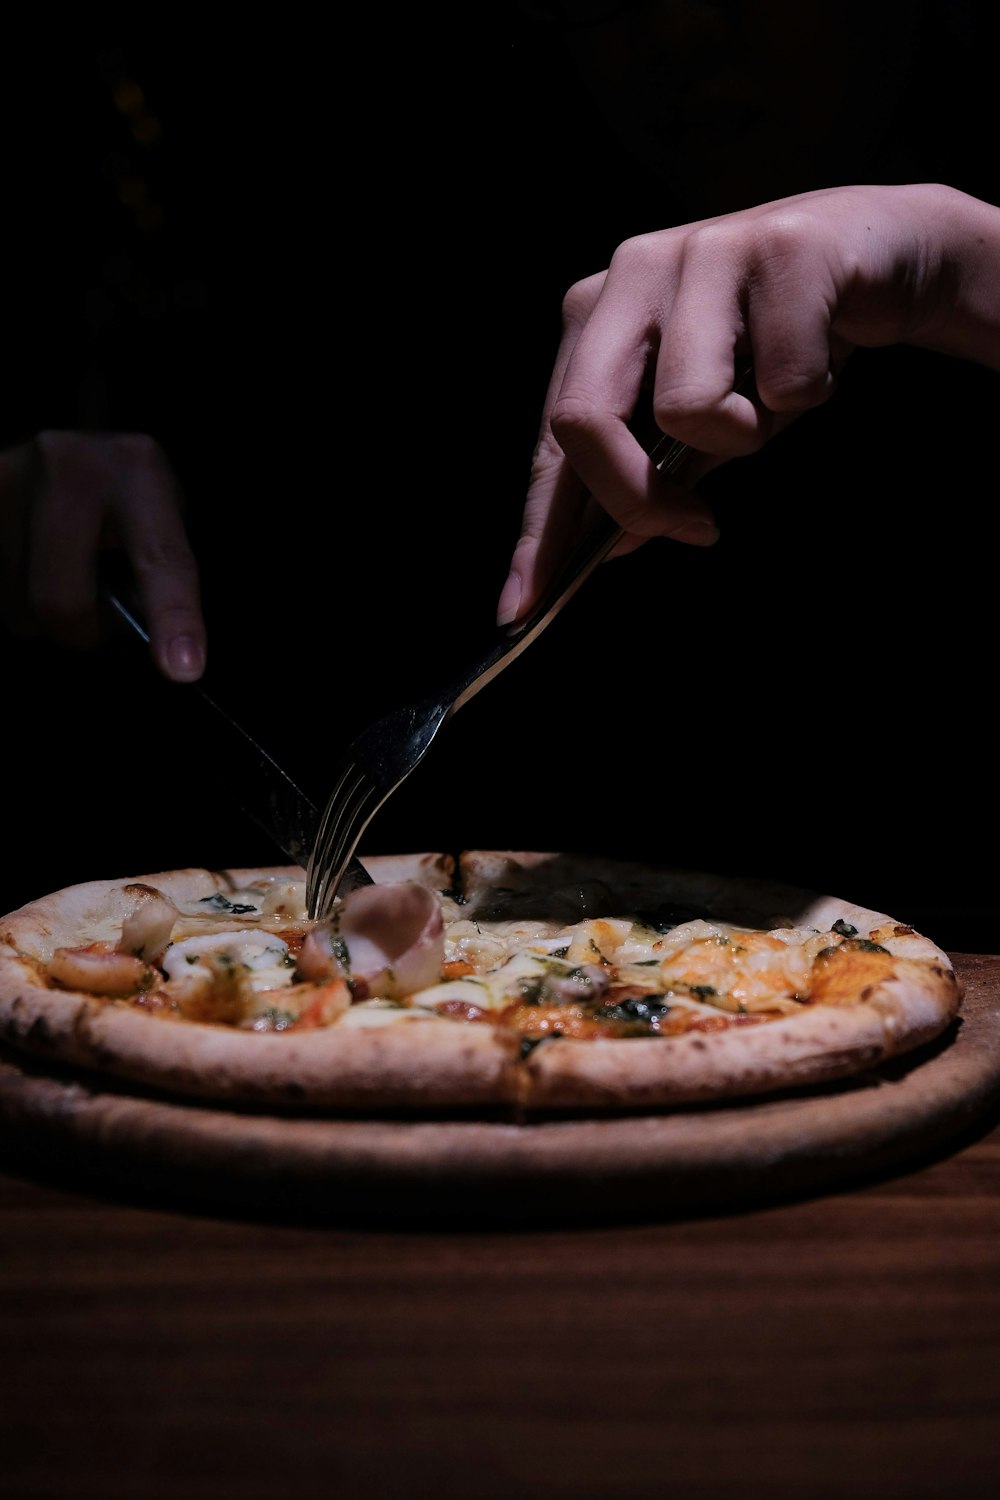 person holding stainless steel fork and knife slicing pizza